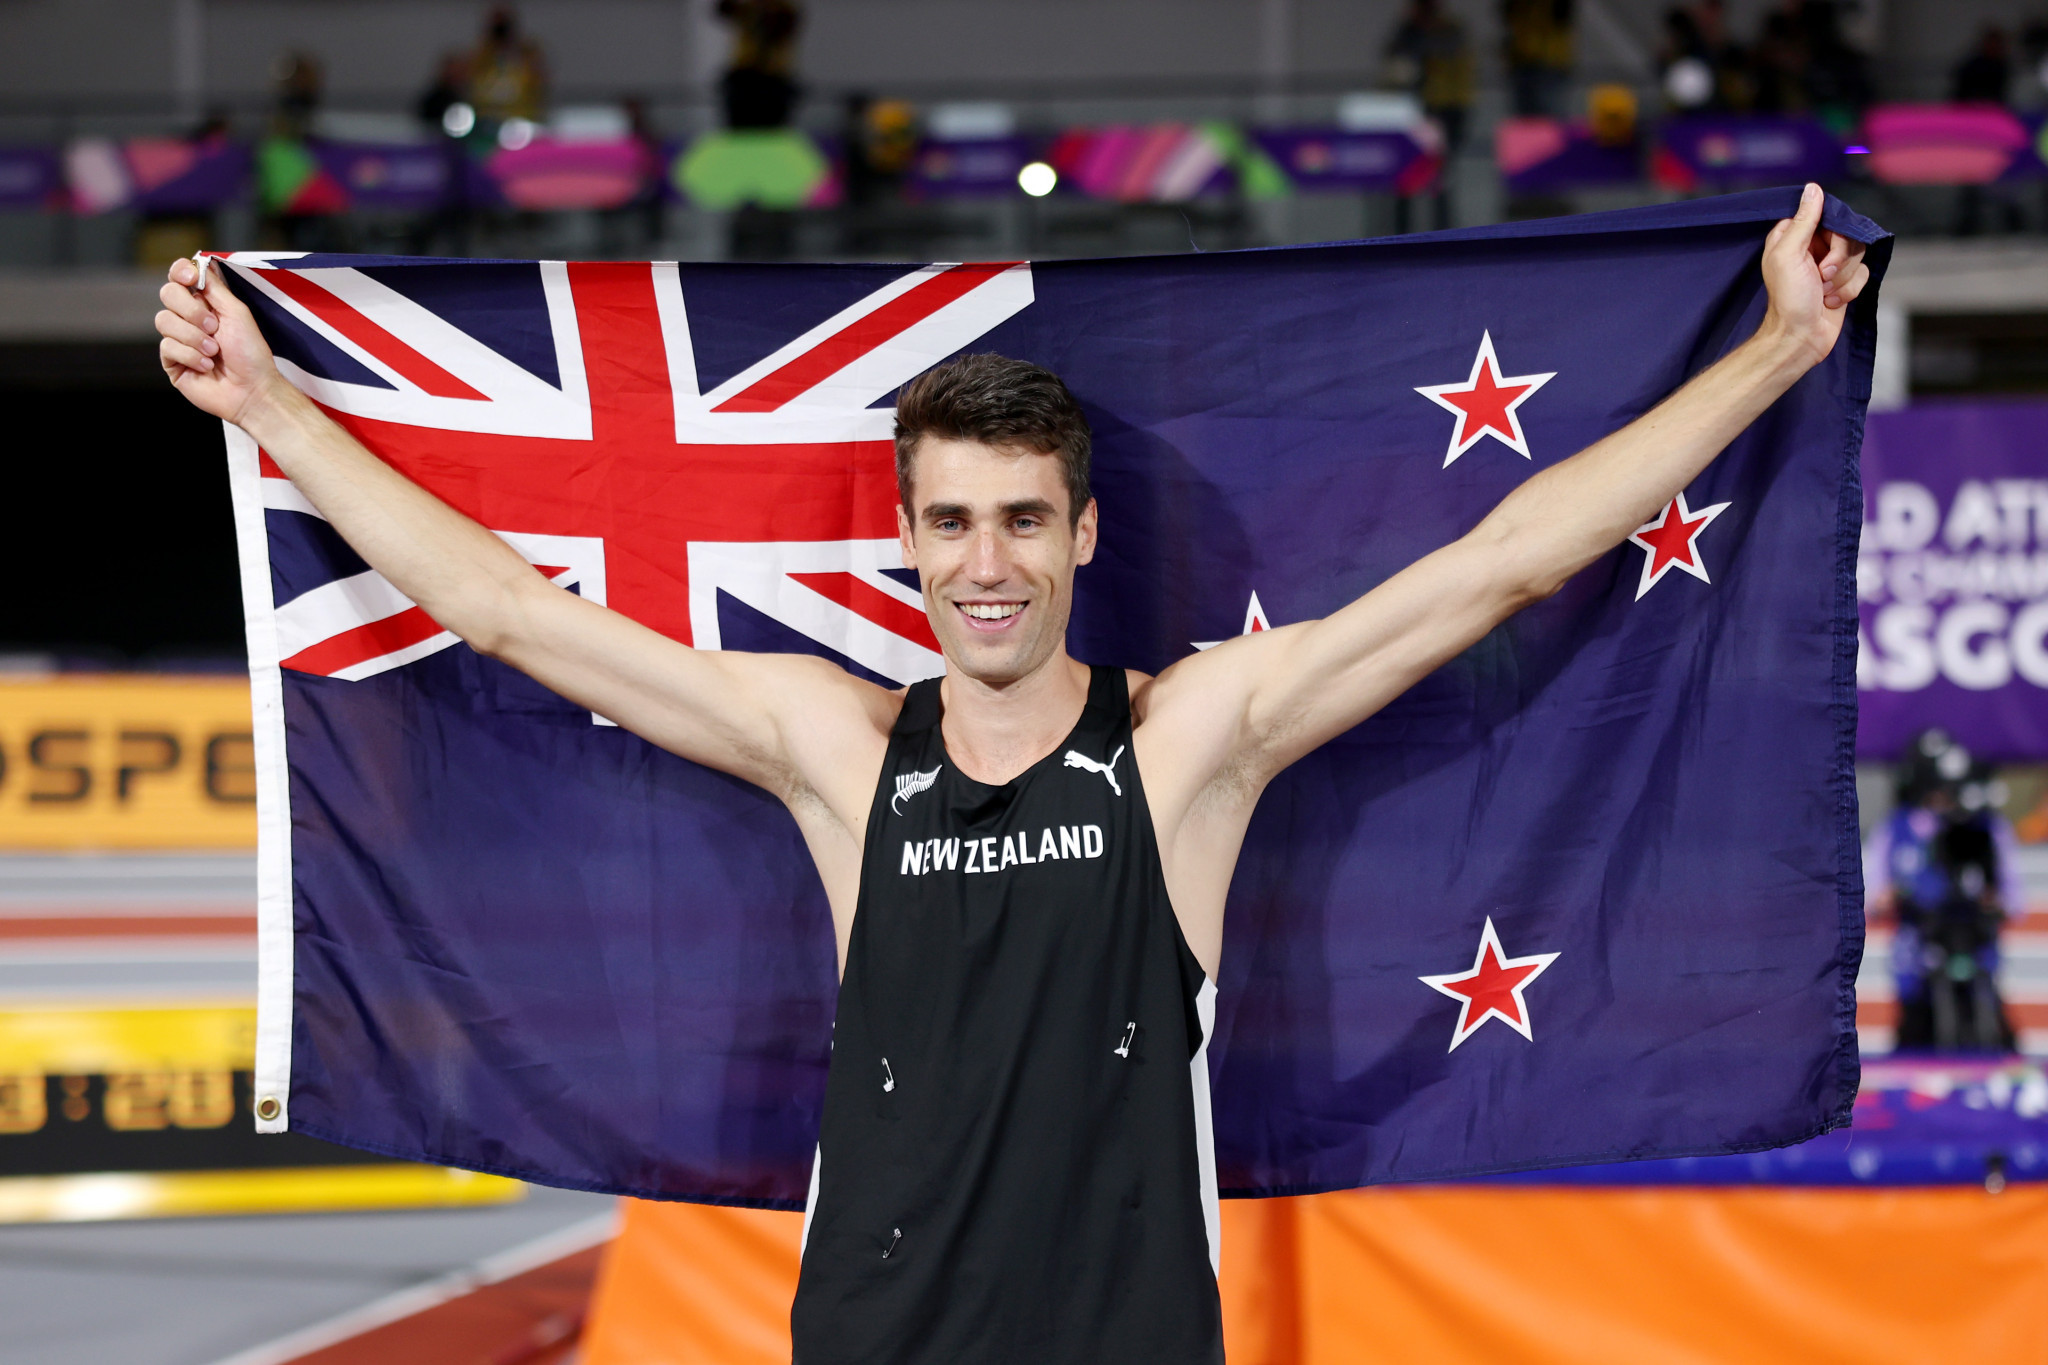 New Zealand high jump star Hammish Kerr will use his toilet trick at Paris 2024, as he eyes the gold medal. GETTY IMAGES